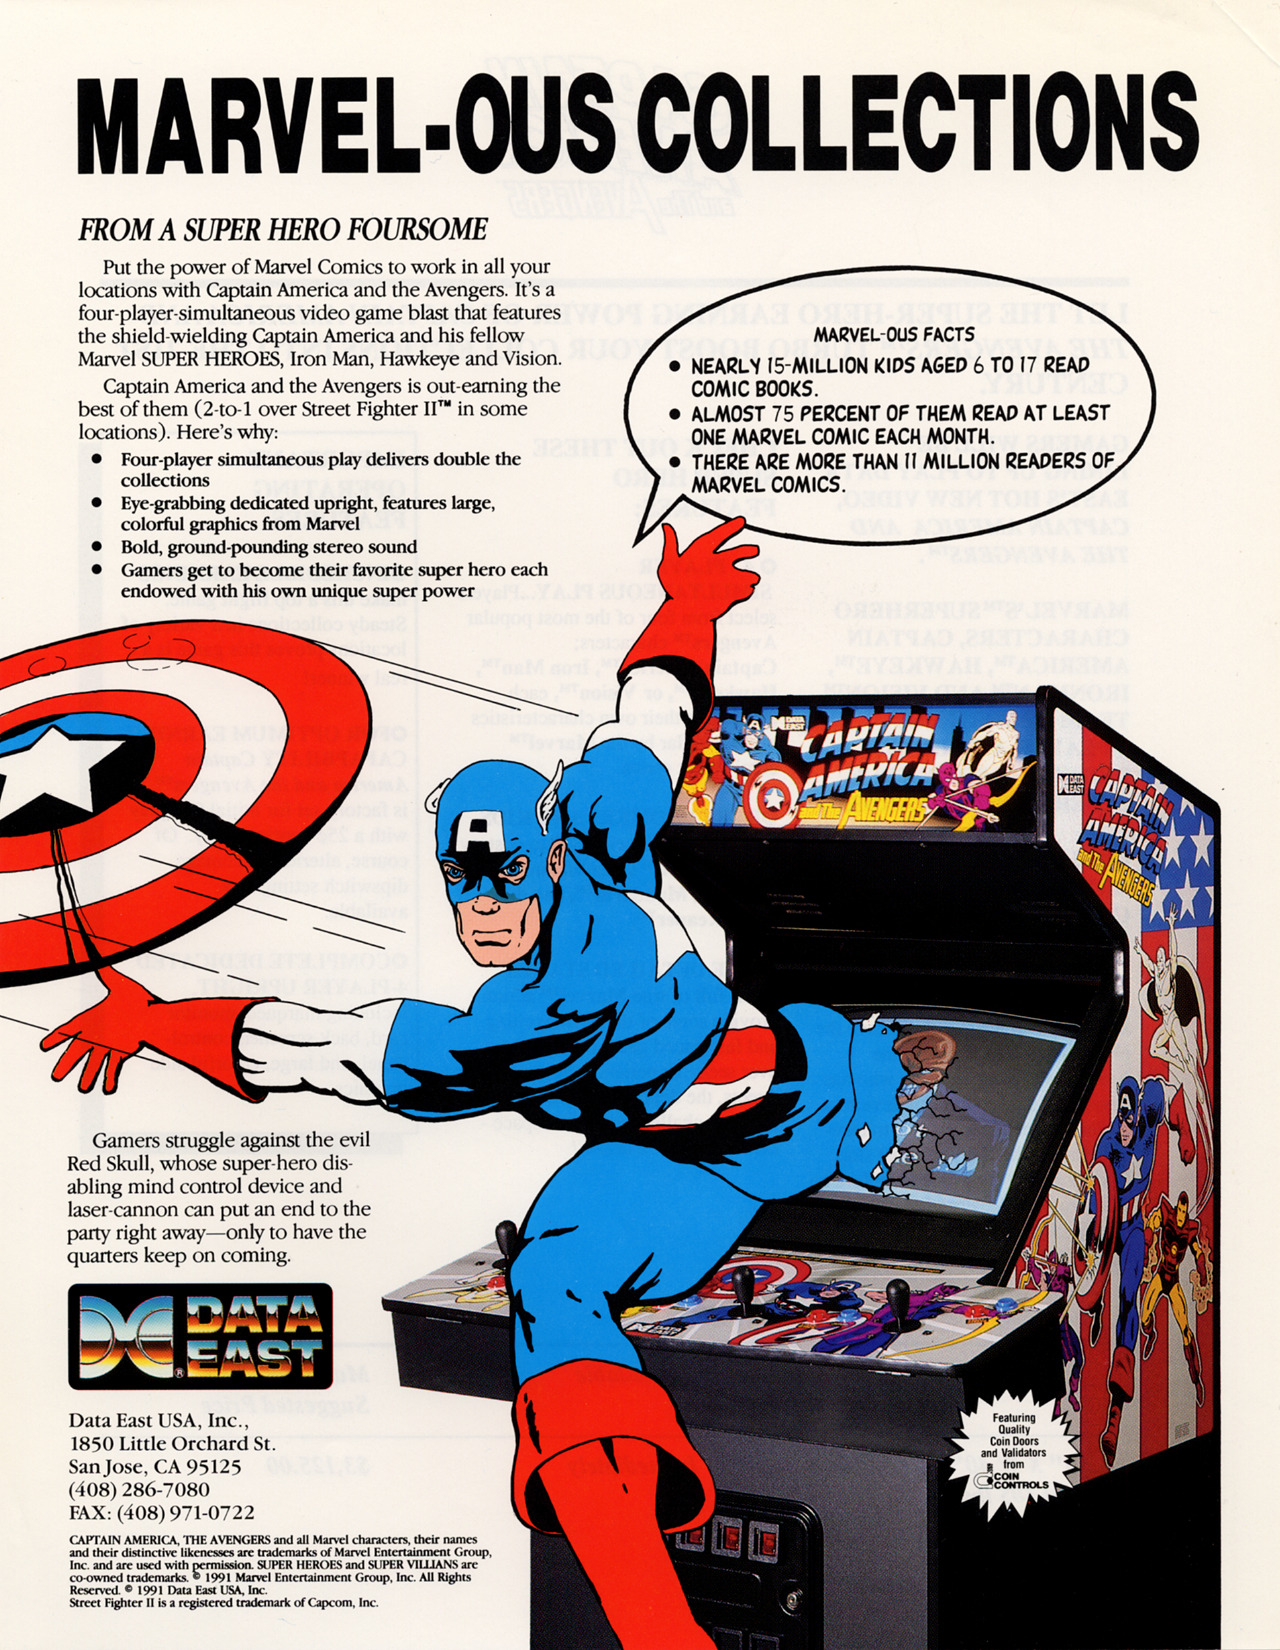 Gamer struggles game. Капитан Америка NES. Captain America and the Avengers NES. Captain America and the Avengers Arcade. Captain America and the Avengers mame.